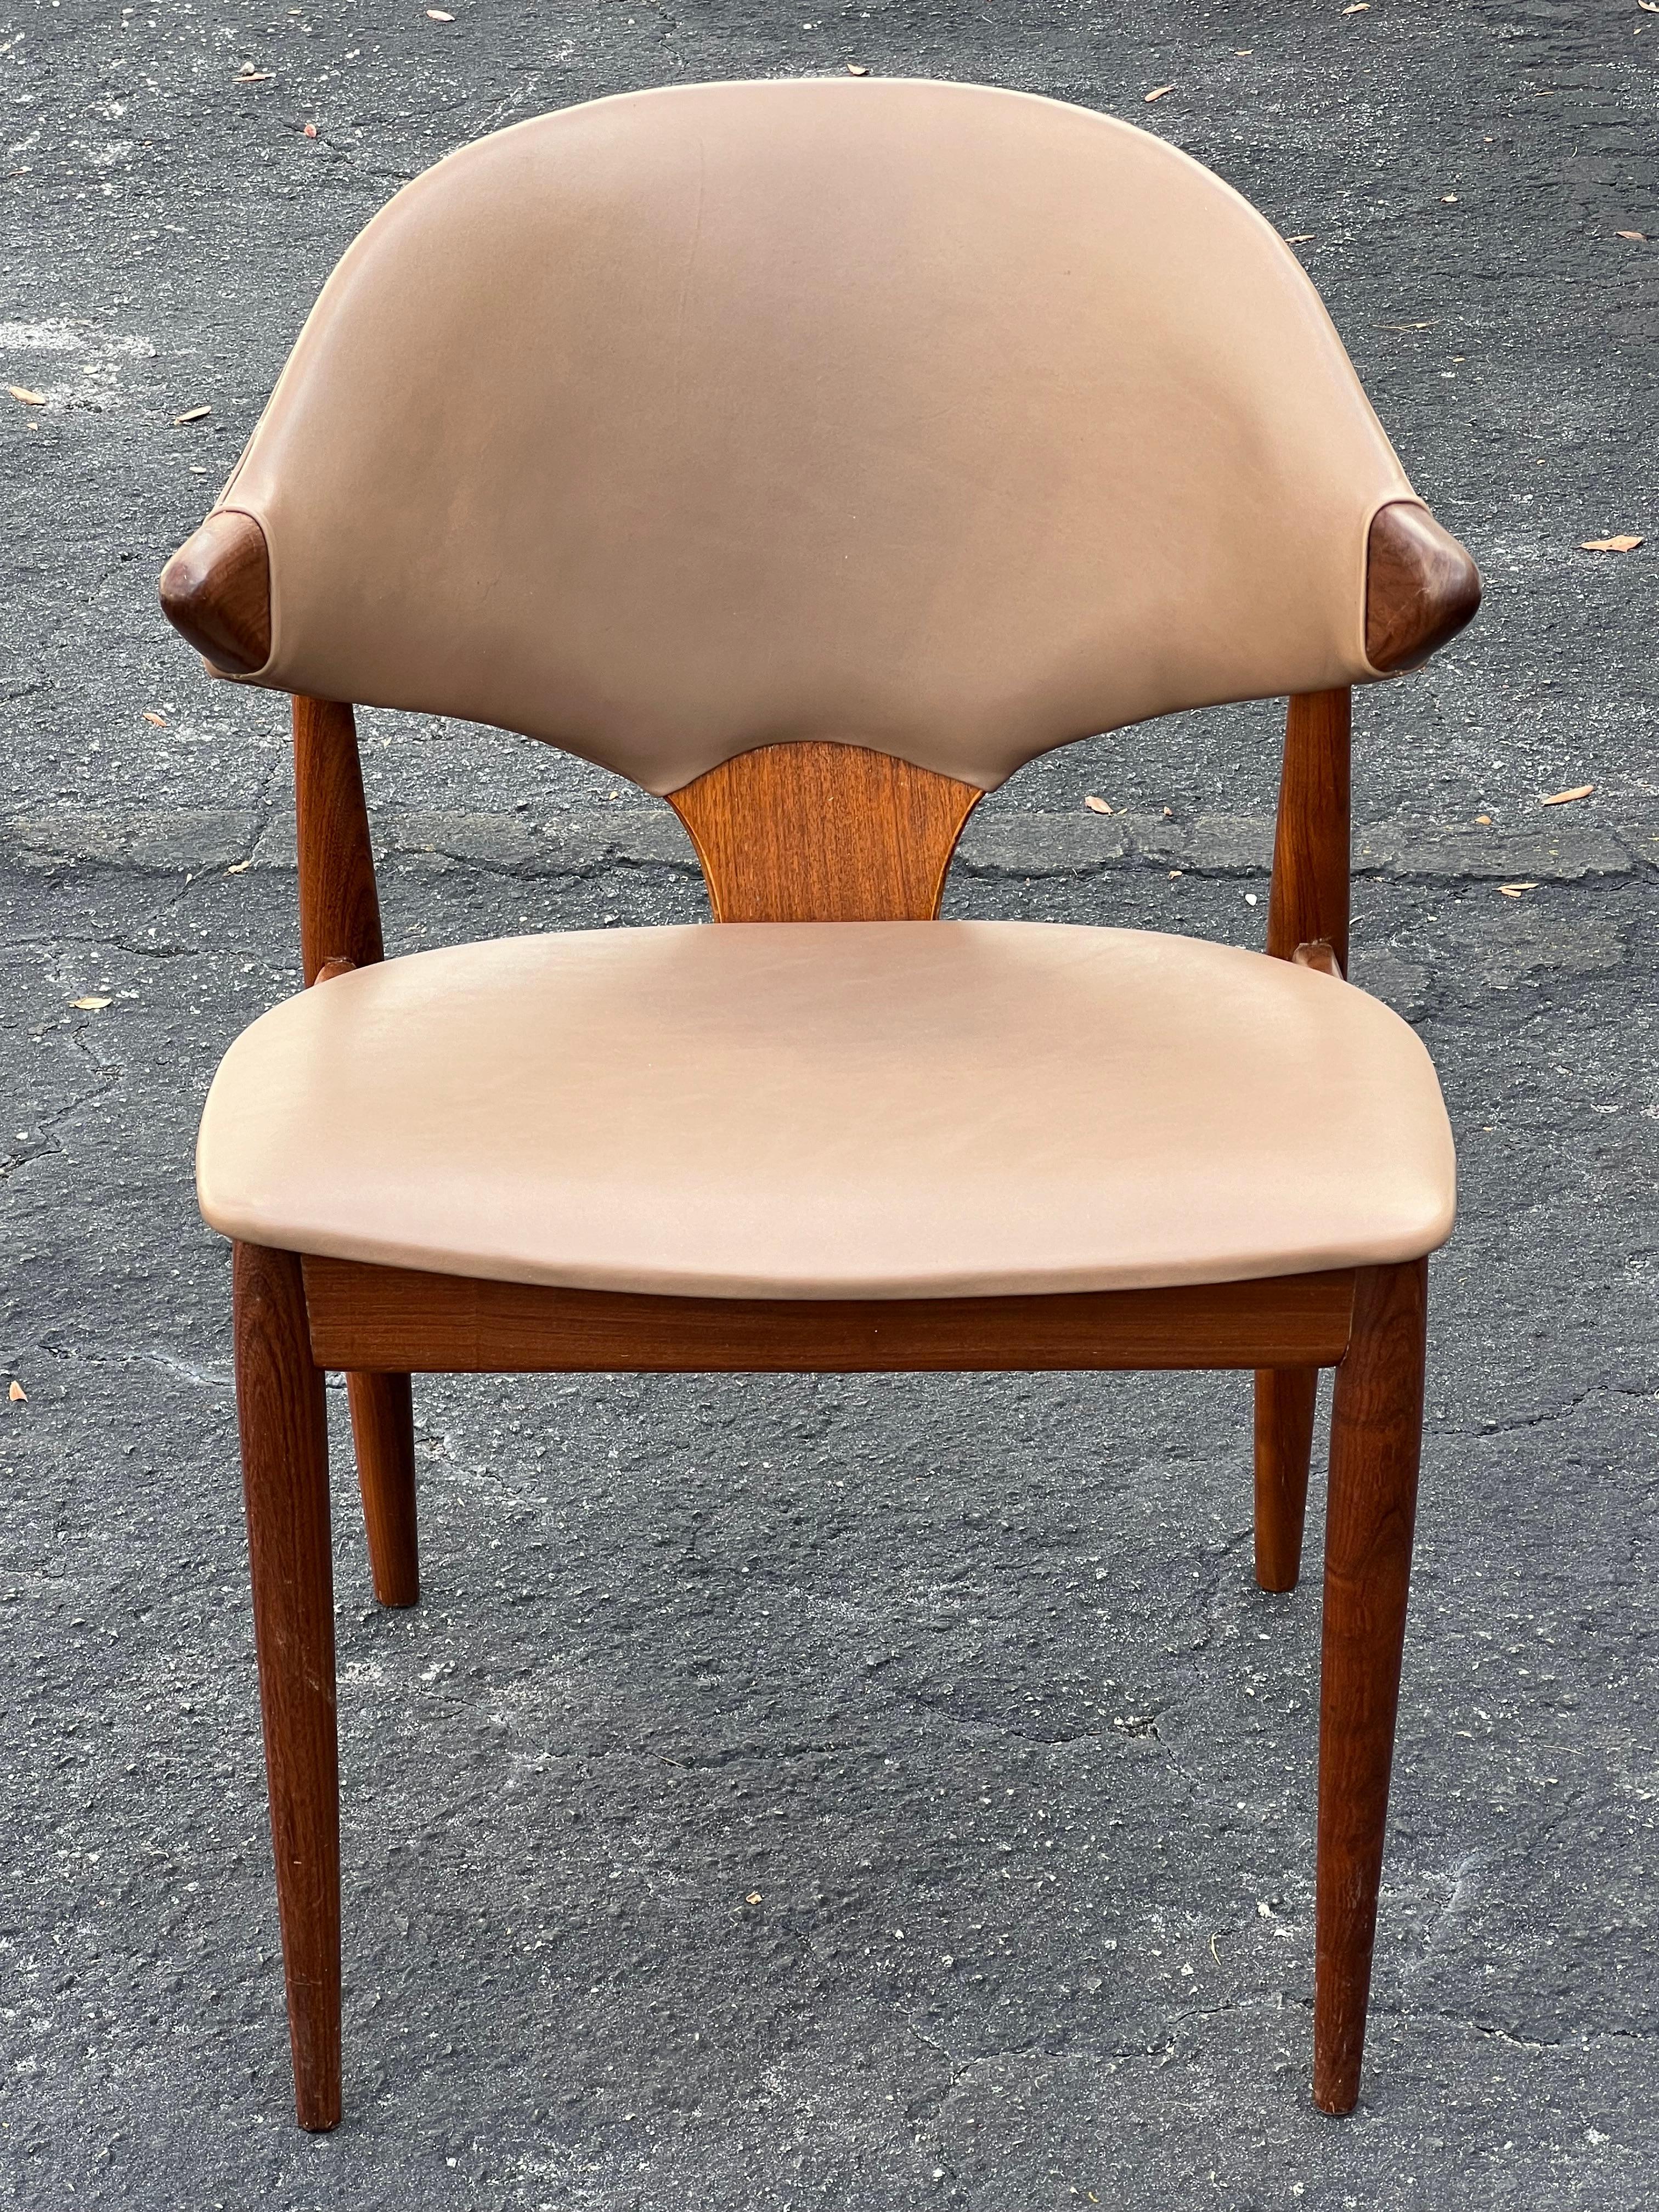 Mid-Century Modern Classic Arne Vodder Leather And Teak Chair For Mahjongg Holland 1964 For Sale